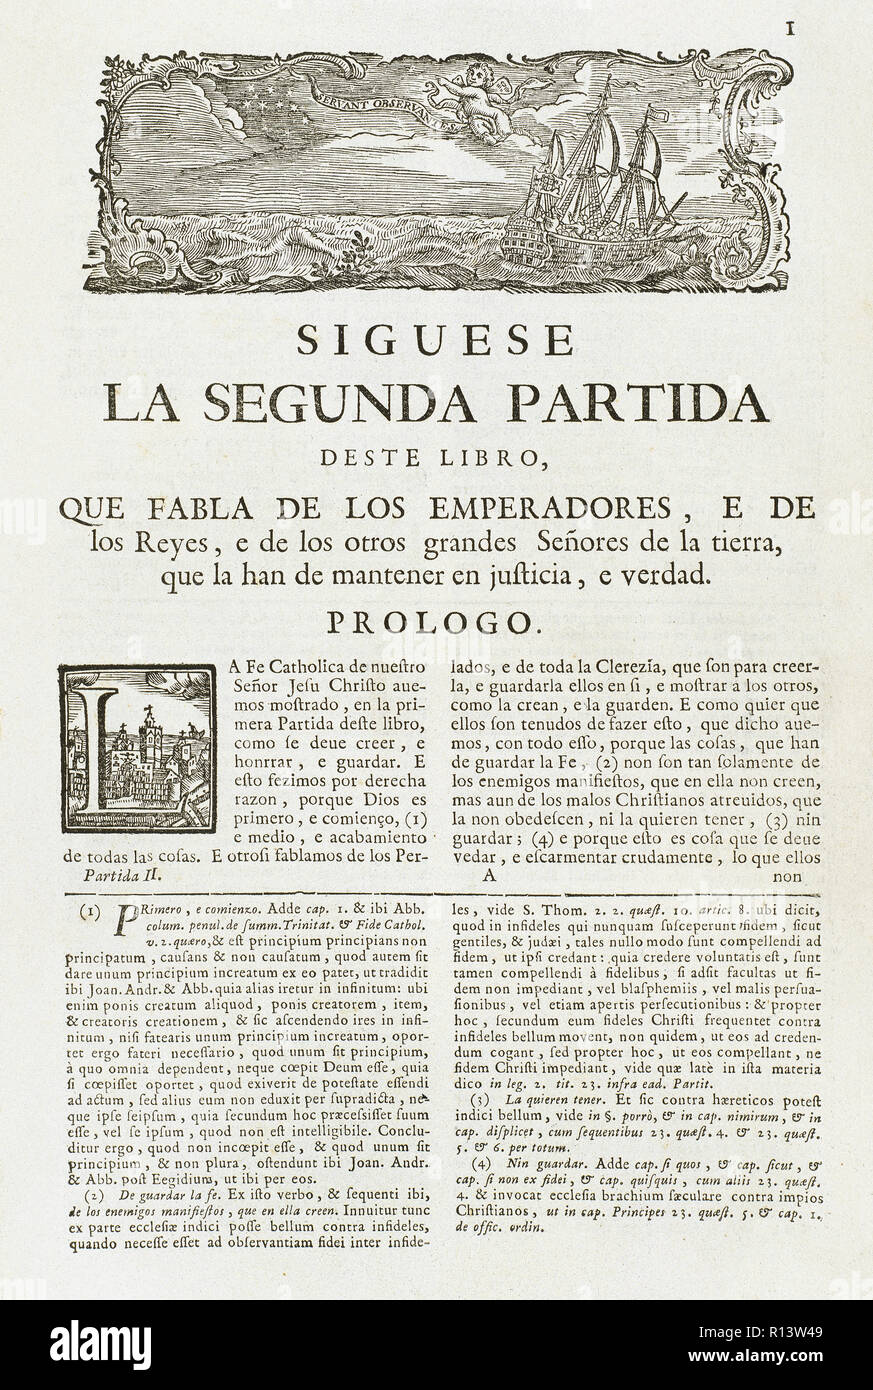 Alfonso X of Castile (1221-1284) The Wise. King of Castile, Leon and Galicia. The Siete Partidas 'Seven-Part Code', 1256.  Compiled of normative rules. One of the most important judicial works of the Middle Ages. Prologue of the 'Segunda Partida', dedicated to the temporal power. Copy edited in 1767. Stock Photo